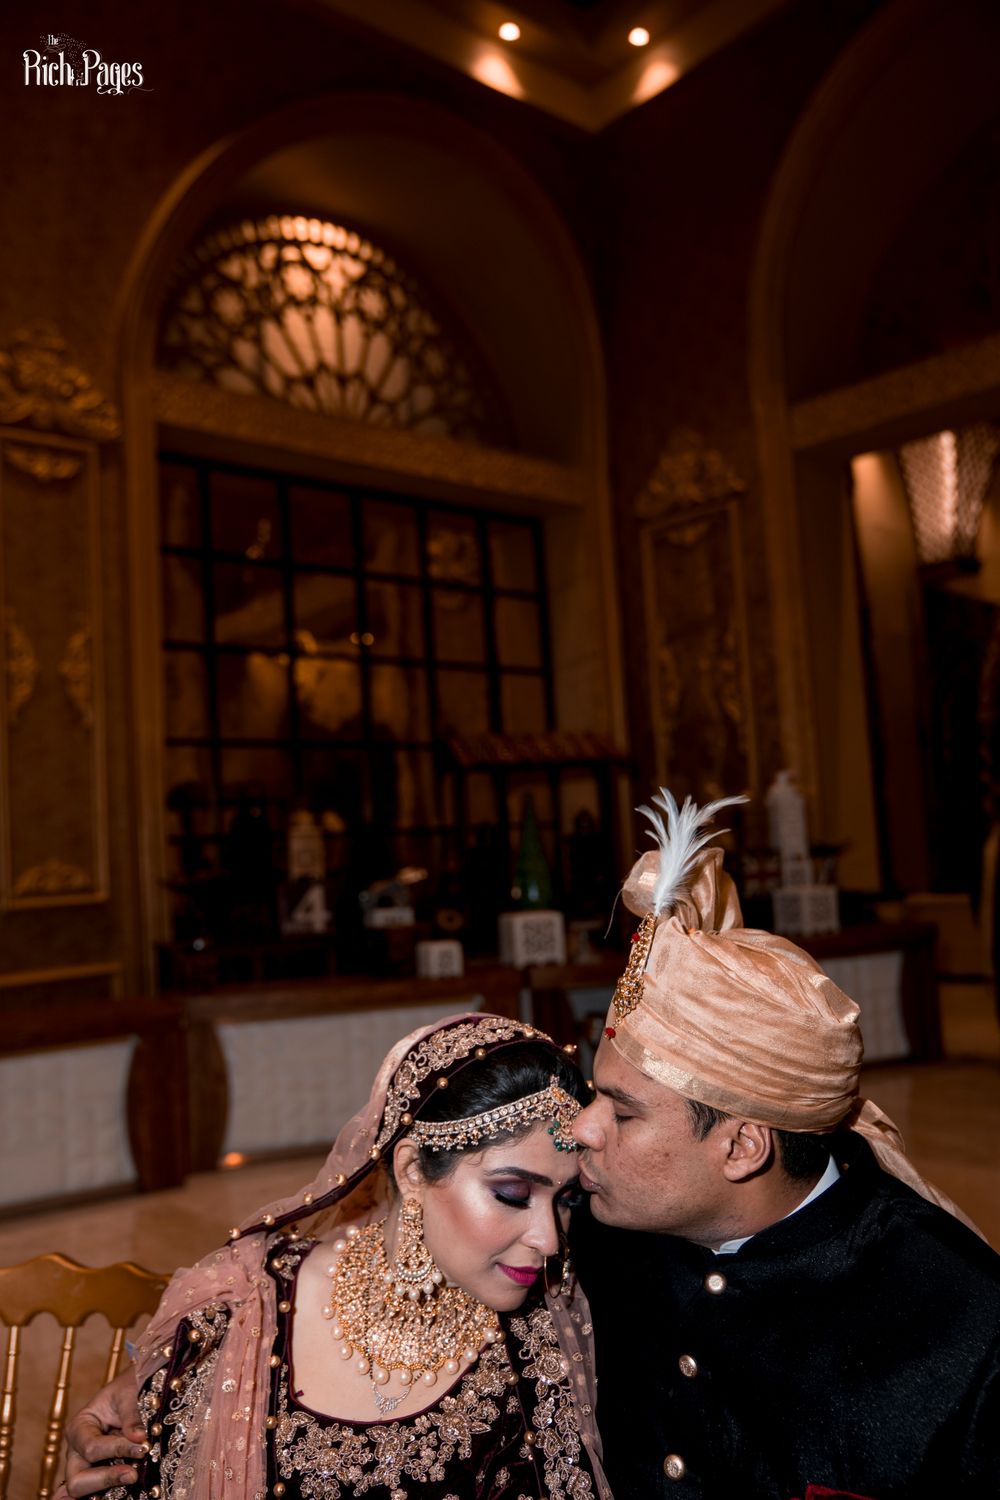 Photo From WEDDING (ANNIESH-NITIKA) - By The Rich Pages